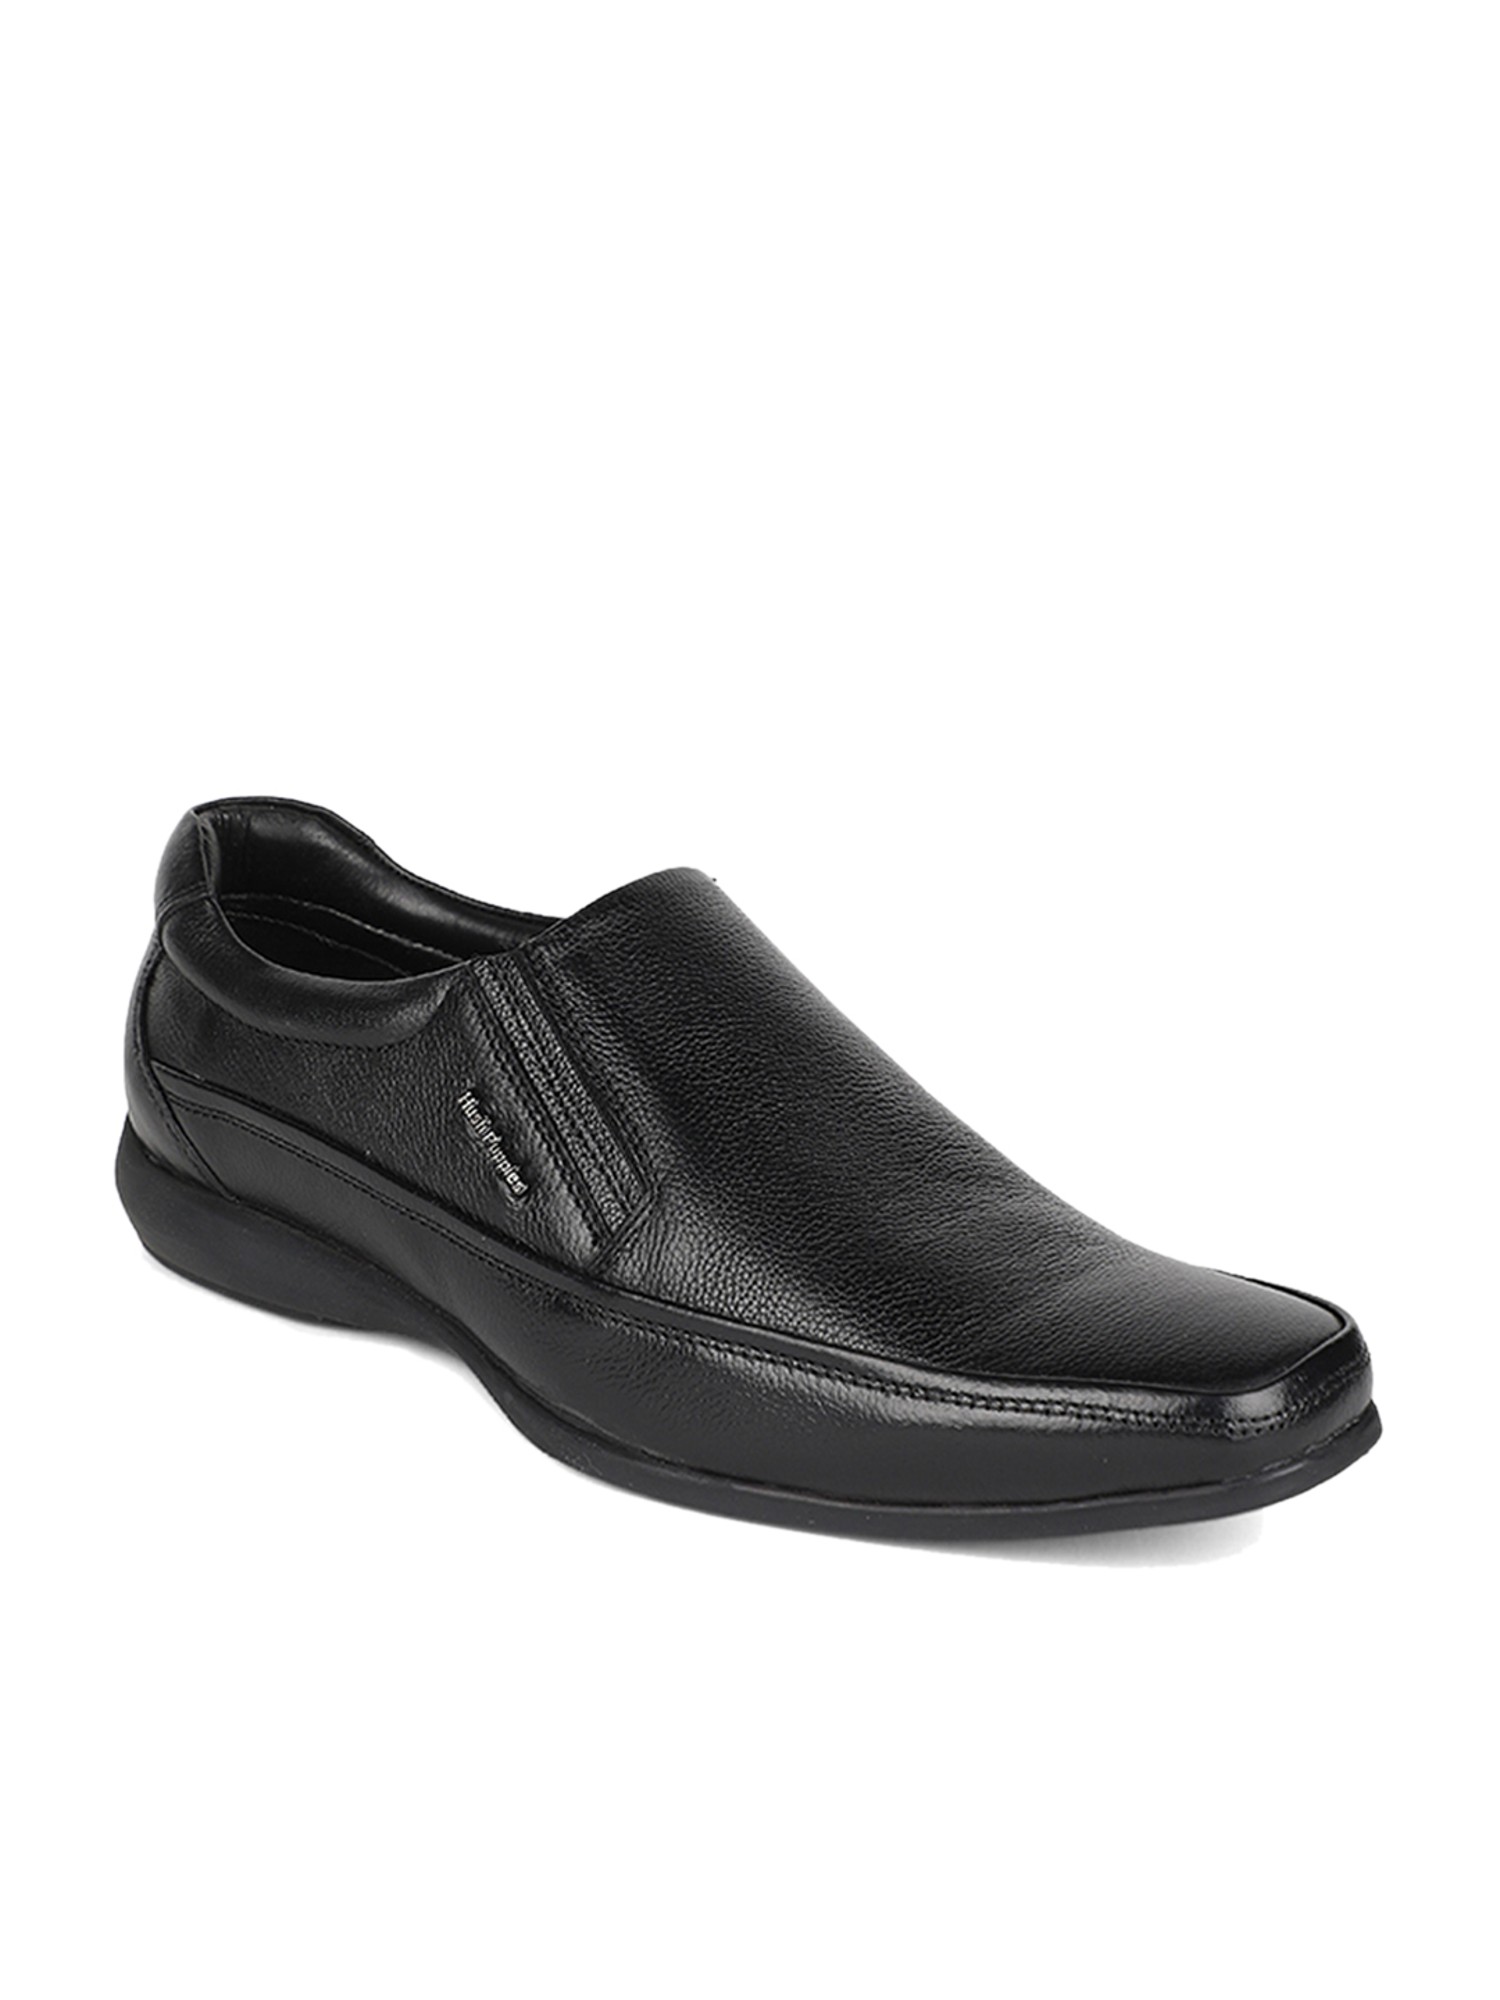 Buy Hush Puppies Men Black Leather Slip Ons - Casual Shoes for Men 5801827  | Myntra